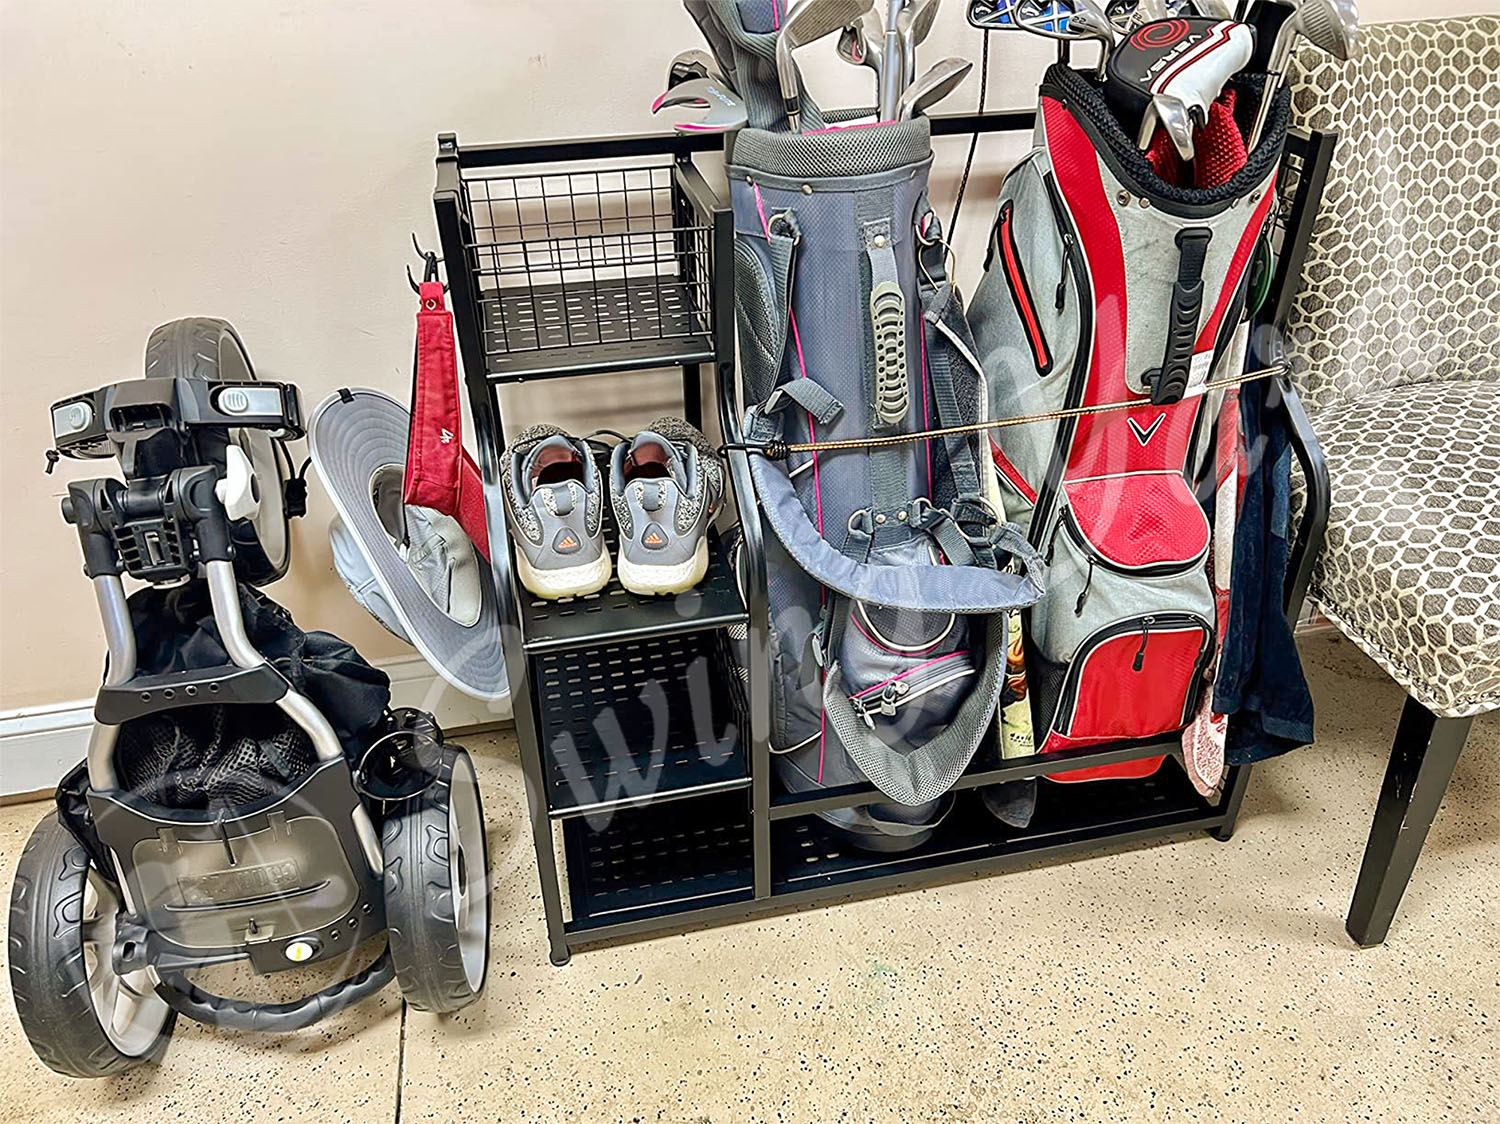 A PLKOW large golf bag rack storage in the golf simulator room